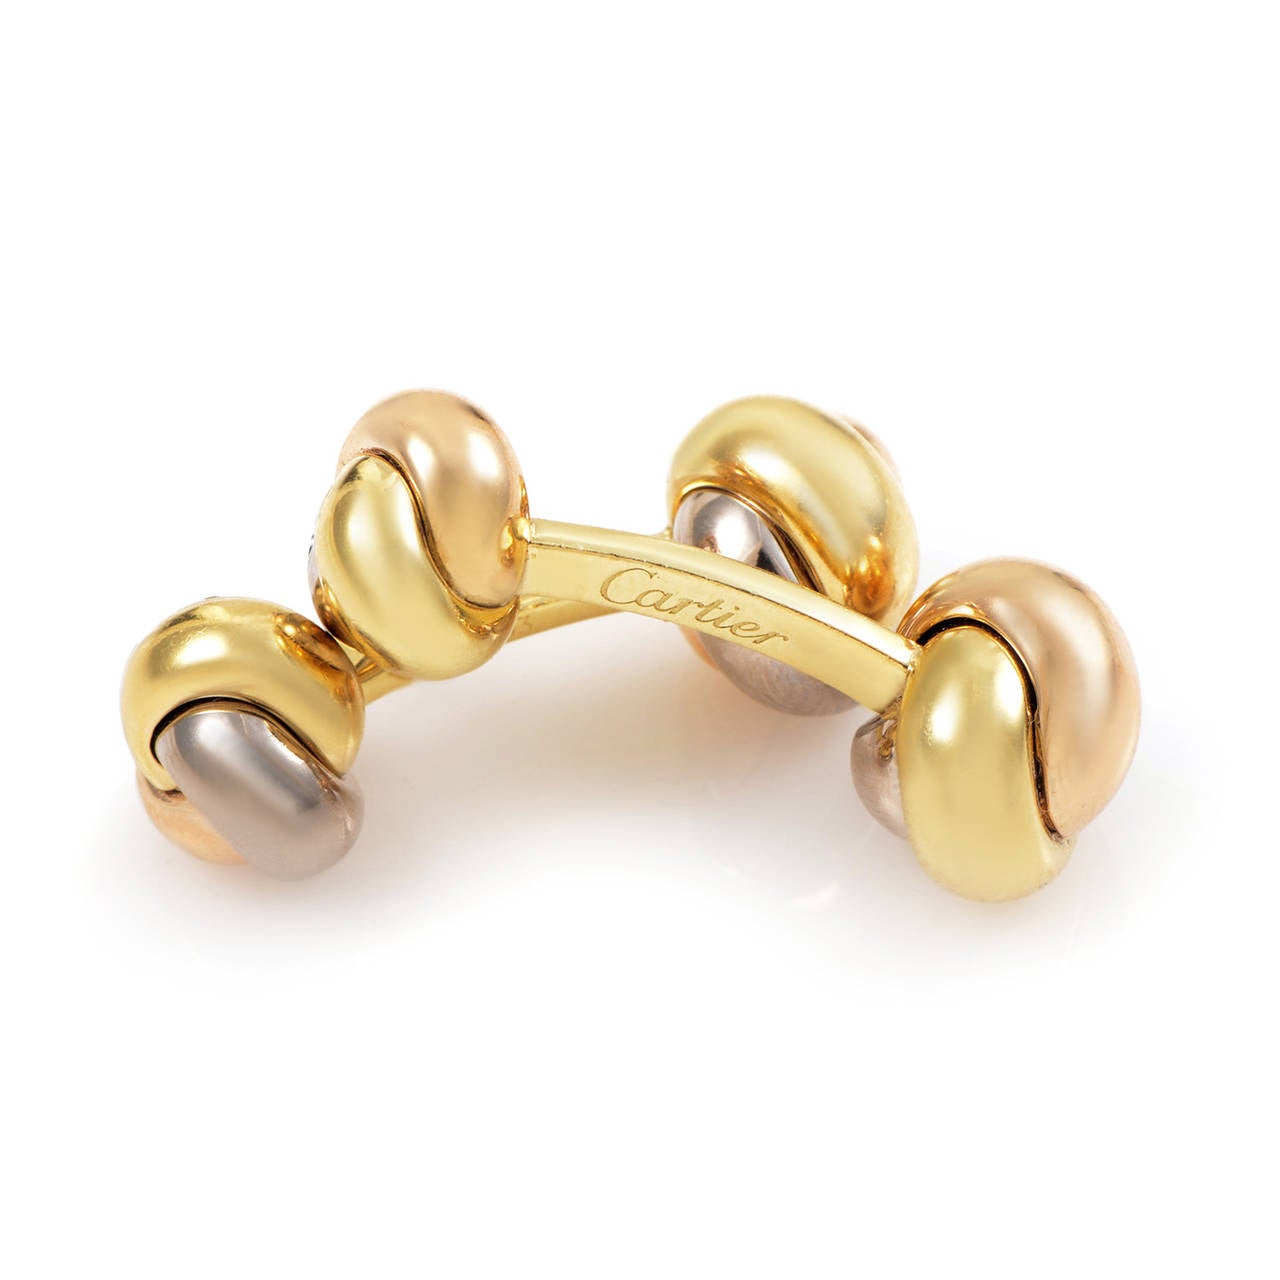 This dazzling pair of cufflinks from Cartier's Trinity collection are perfect for a man or a woman. The cufflinks are made of a combination of 18K white, yellow and rose gold.l